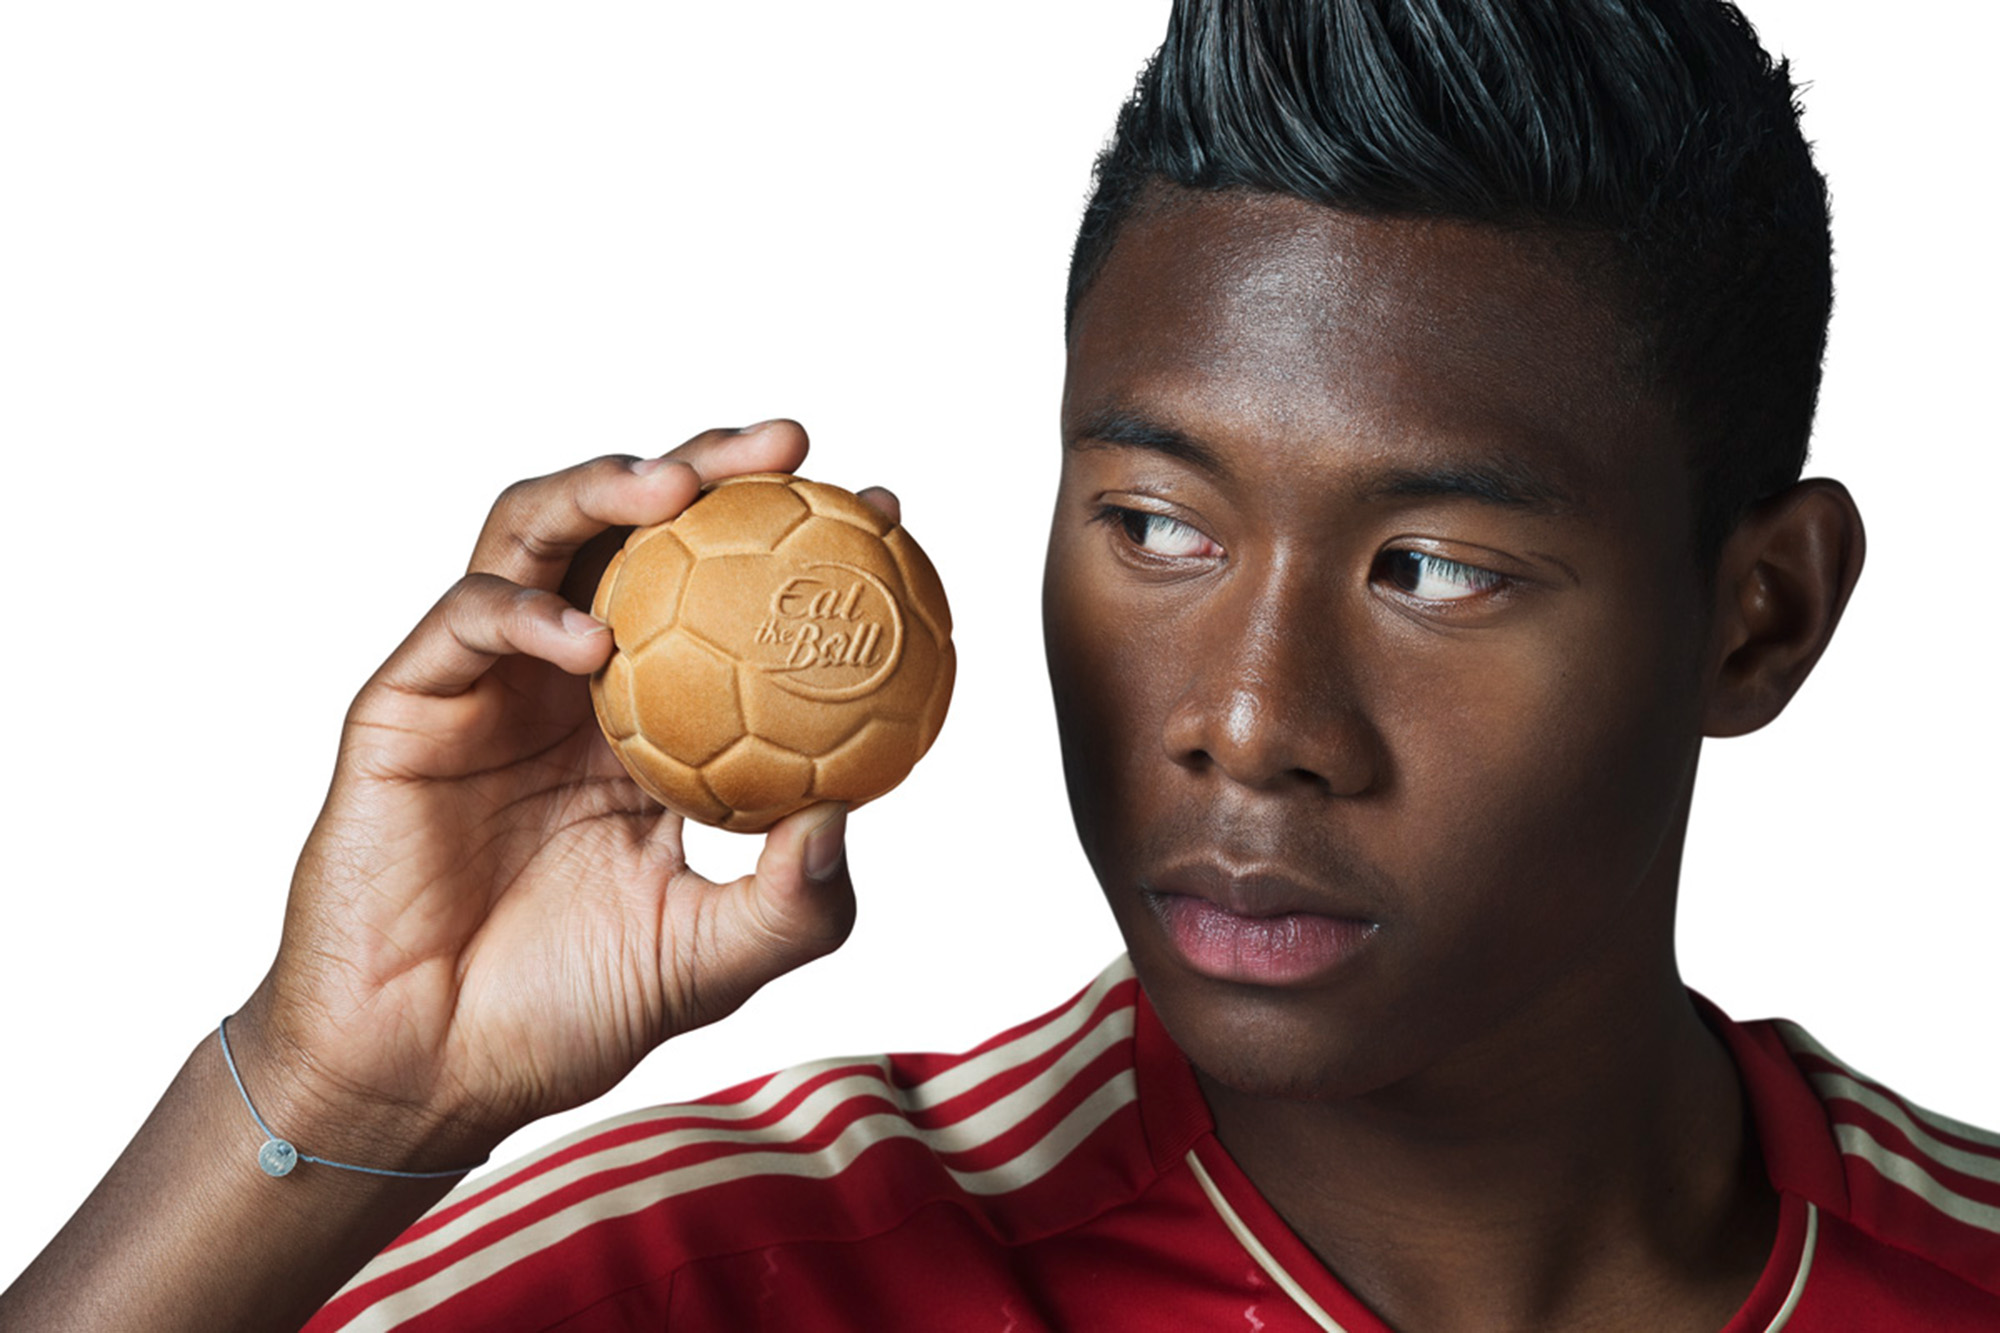 David Alaba For Eat The Ball In Munich - Eat The Ball Alaba , HD Wallpaper & Backgrounds